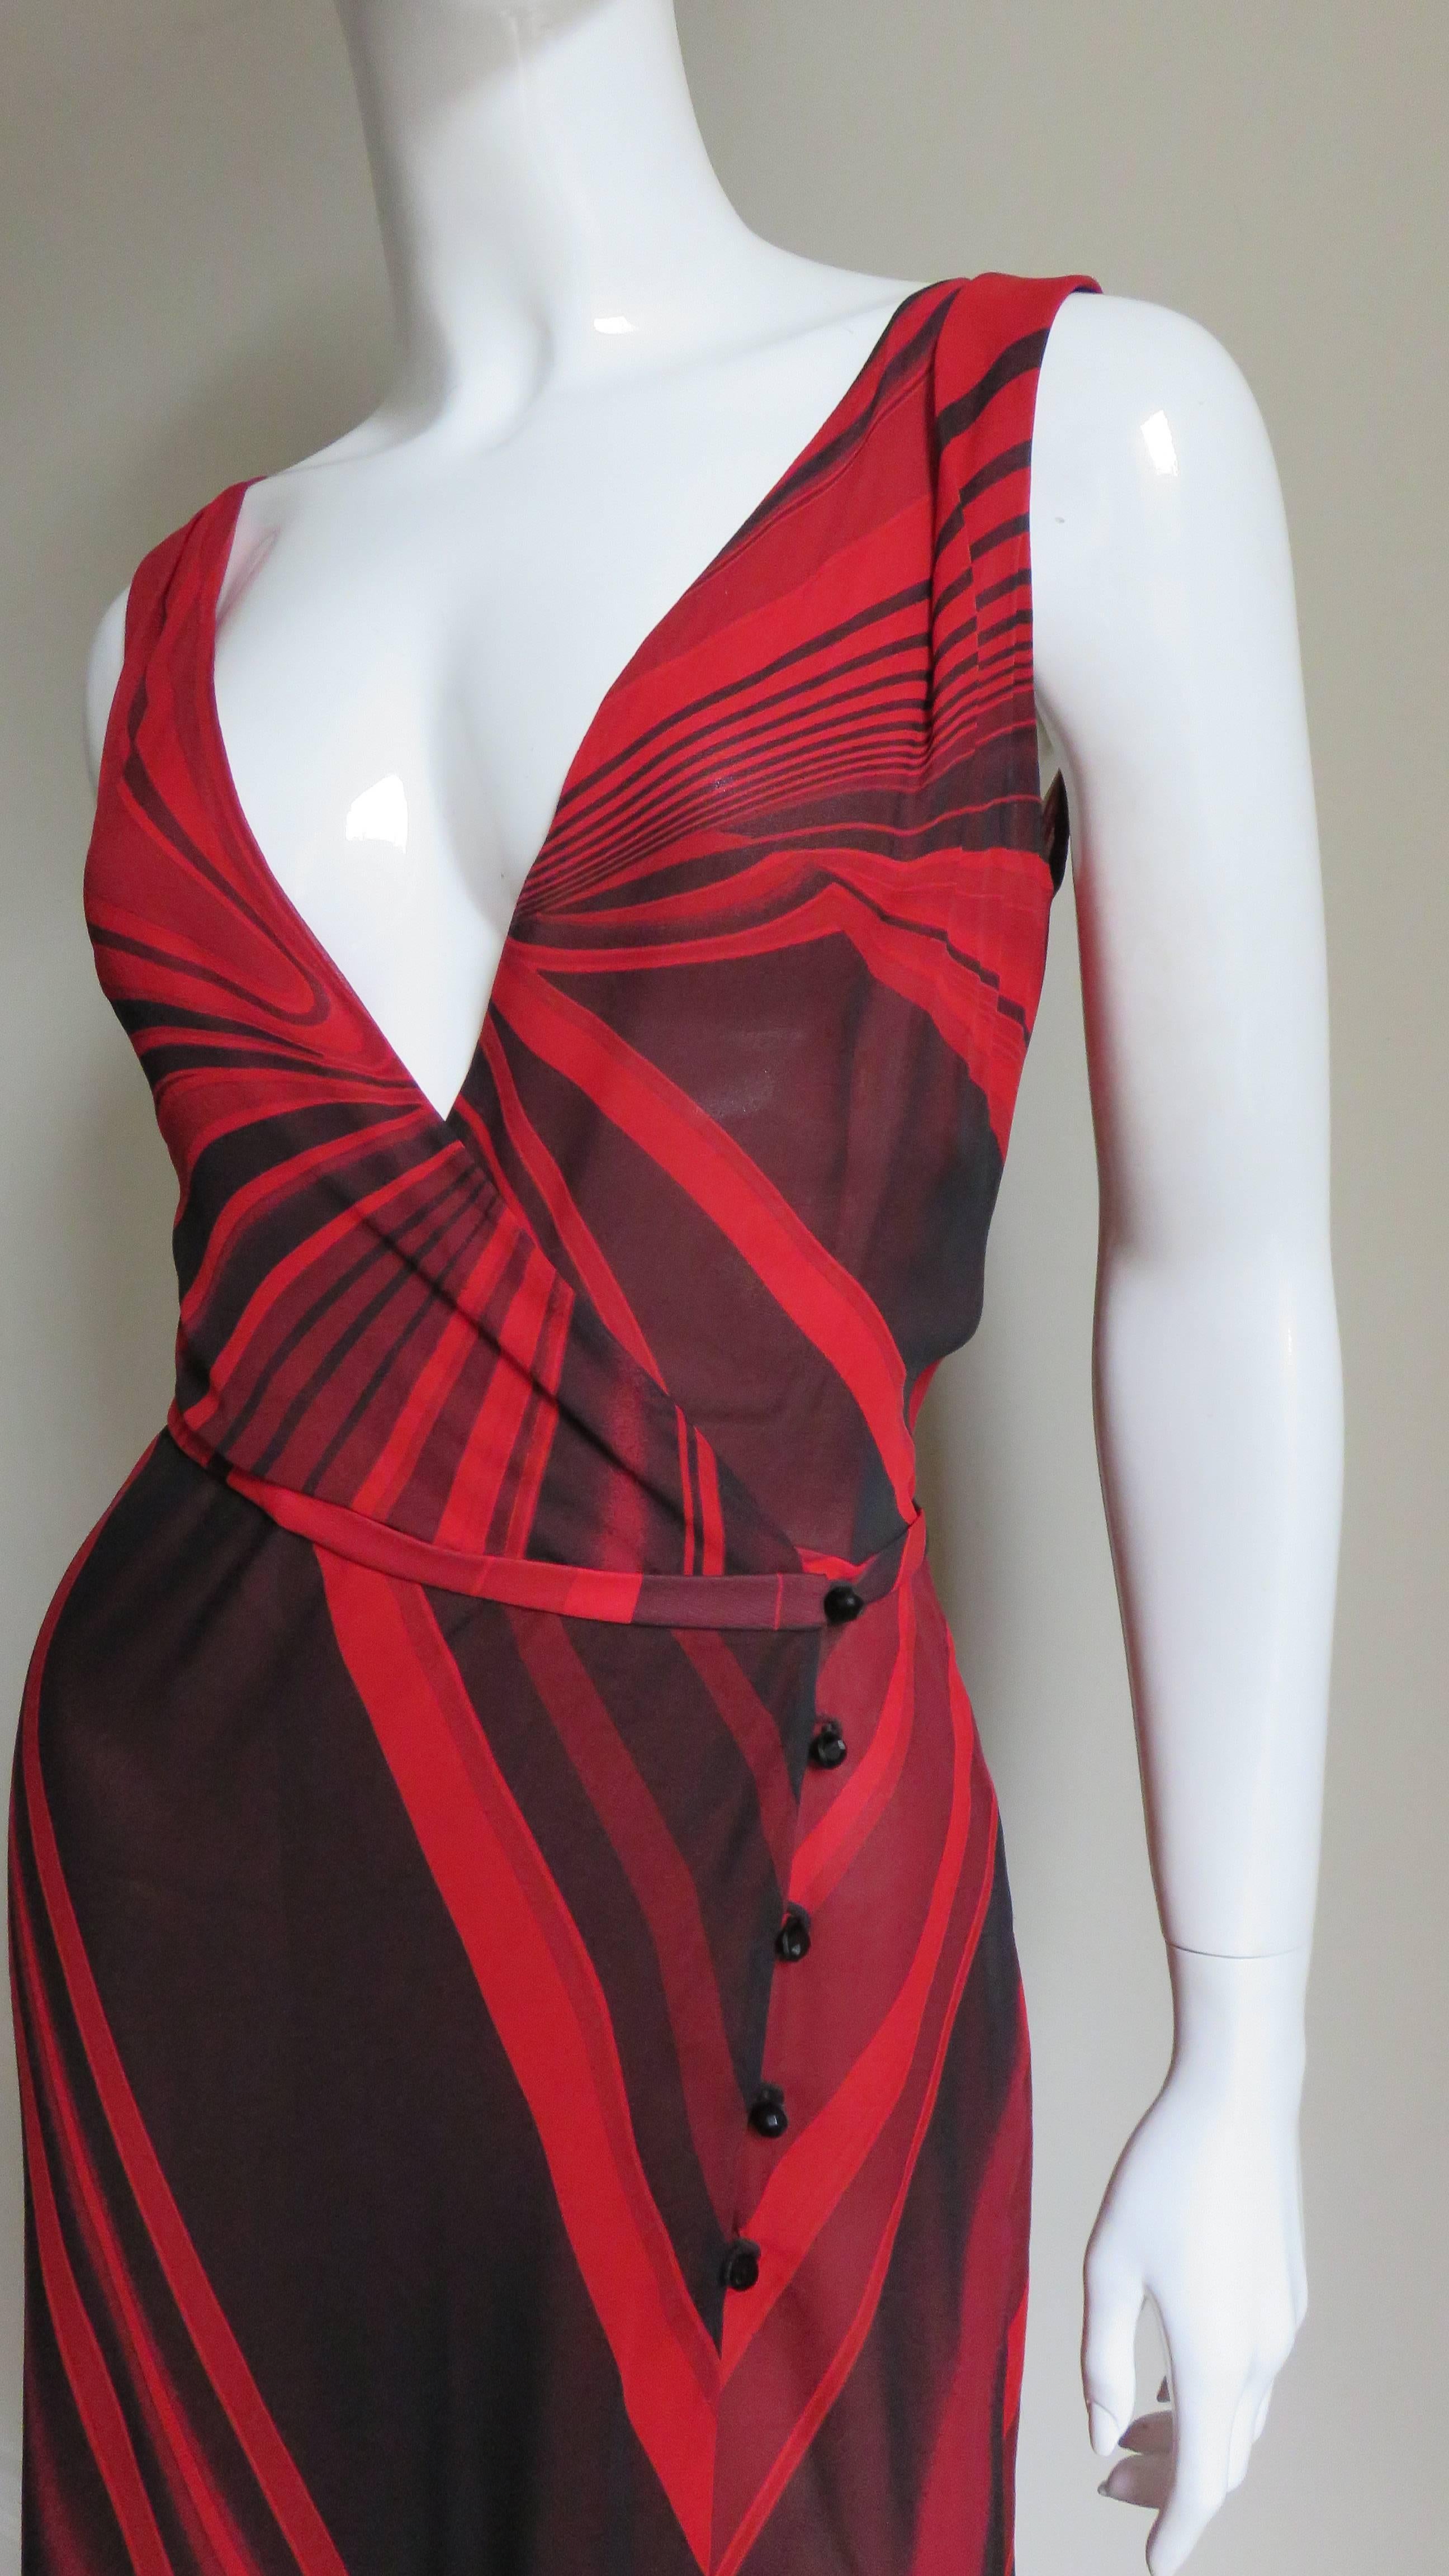 A great red and black abstract patterned silk dress by Gianni Versace Couture.  It has a plunging neckline wrapping at the waist closing with inner snaps and 5 black faceted glass buttons and loops along one side.  There is a center back gore in the